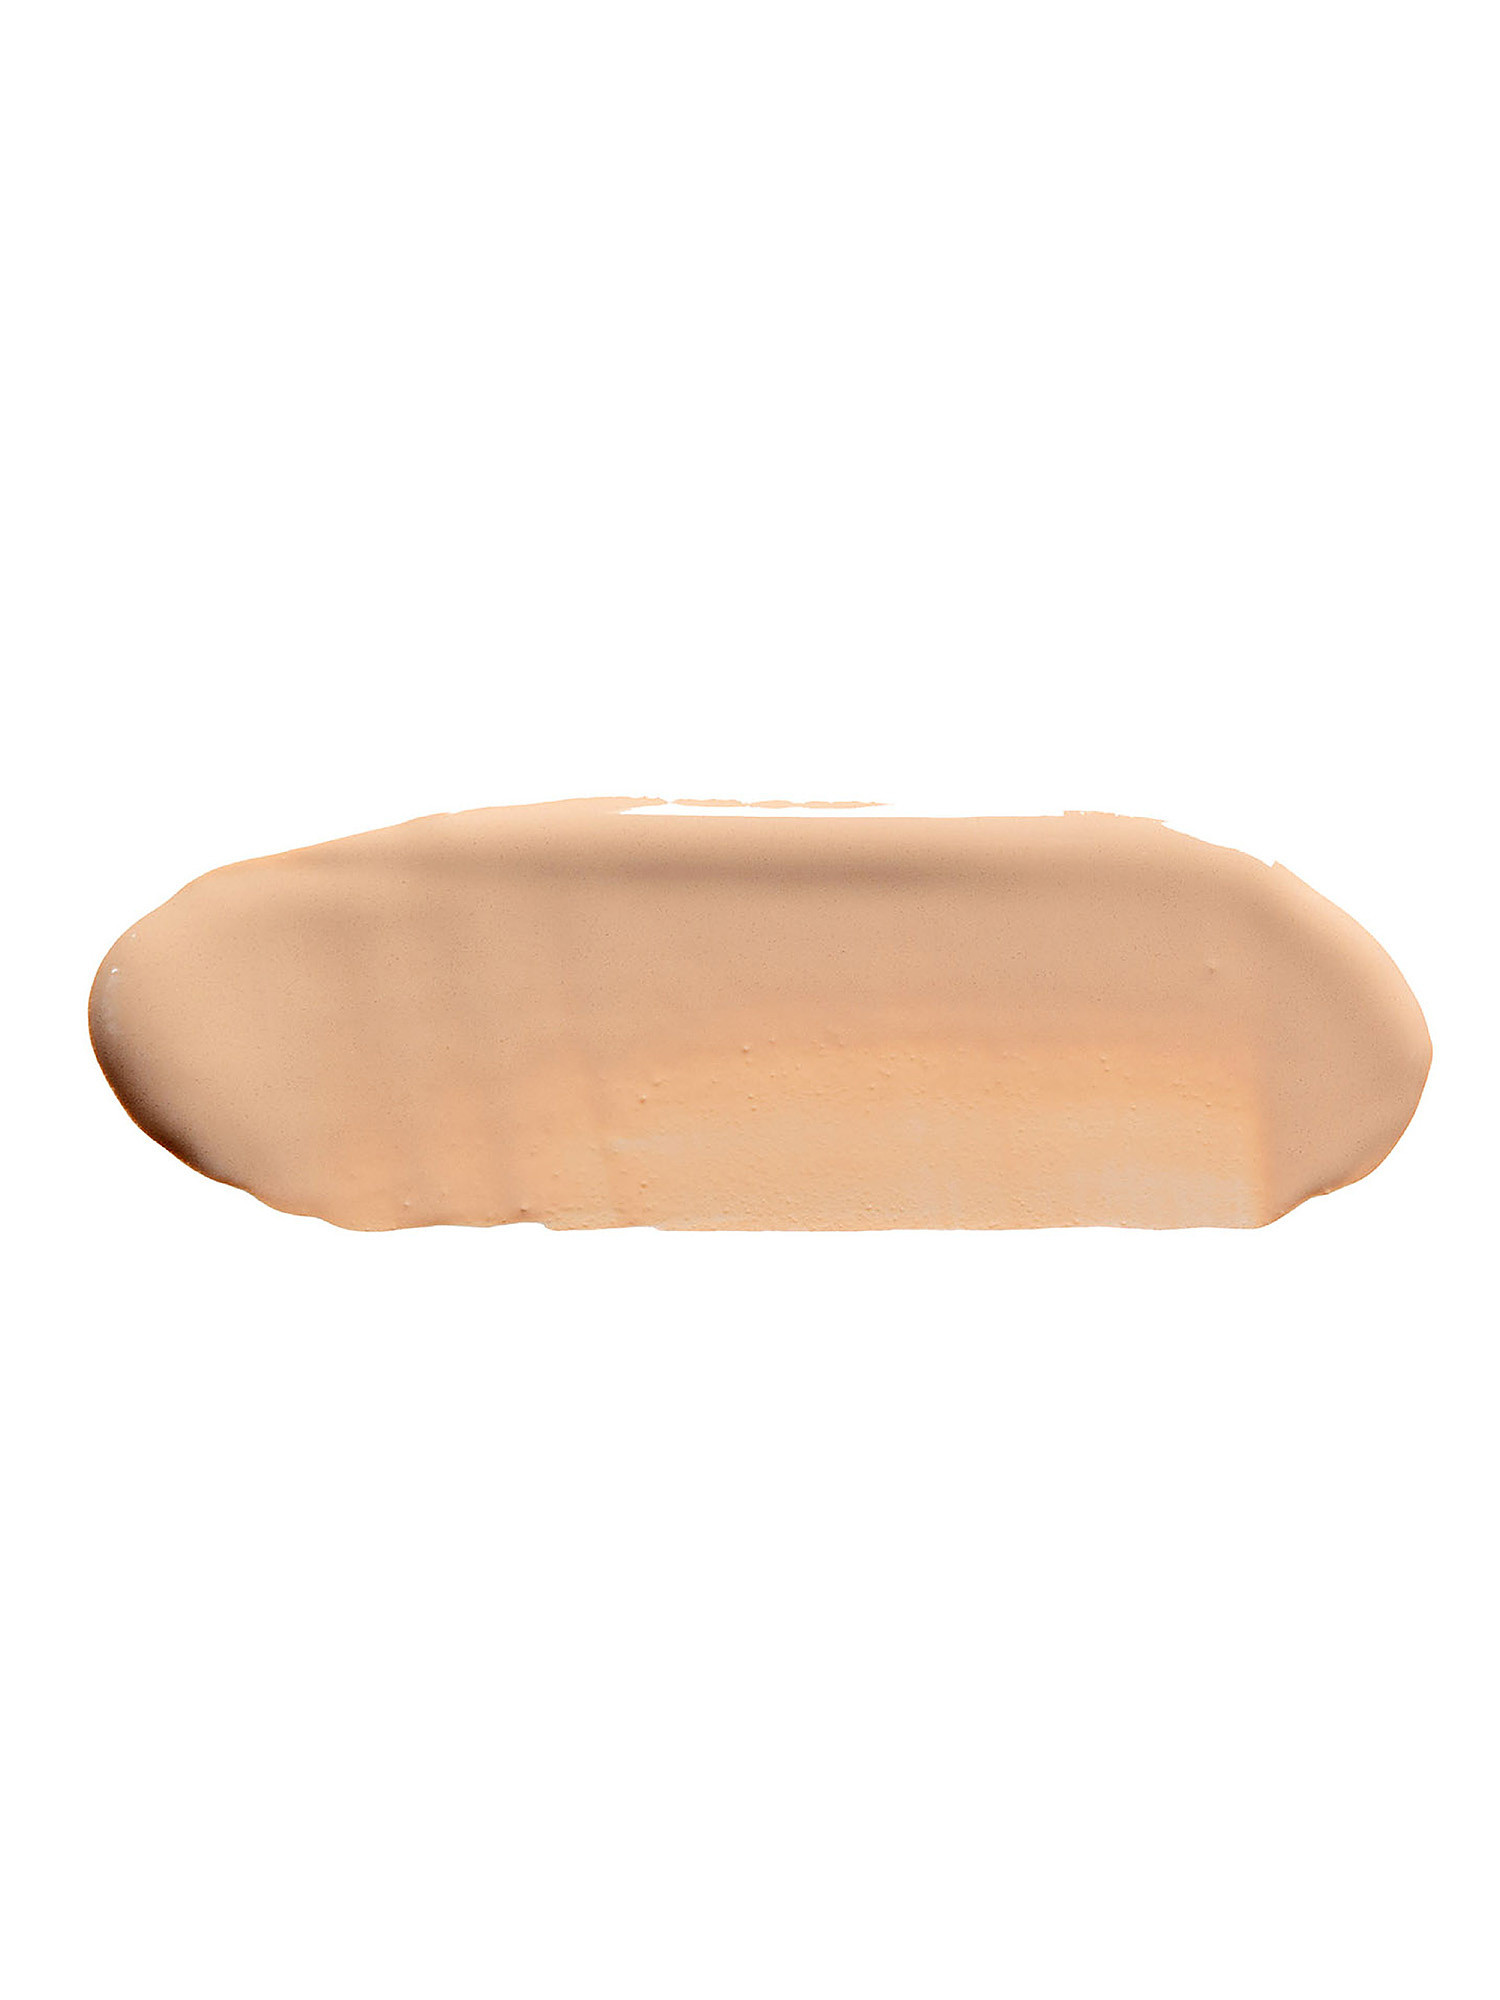 NUDISSIMO Naturally Matte Foundation - 244W, Sand, large image number 1